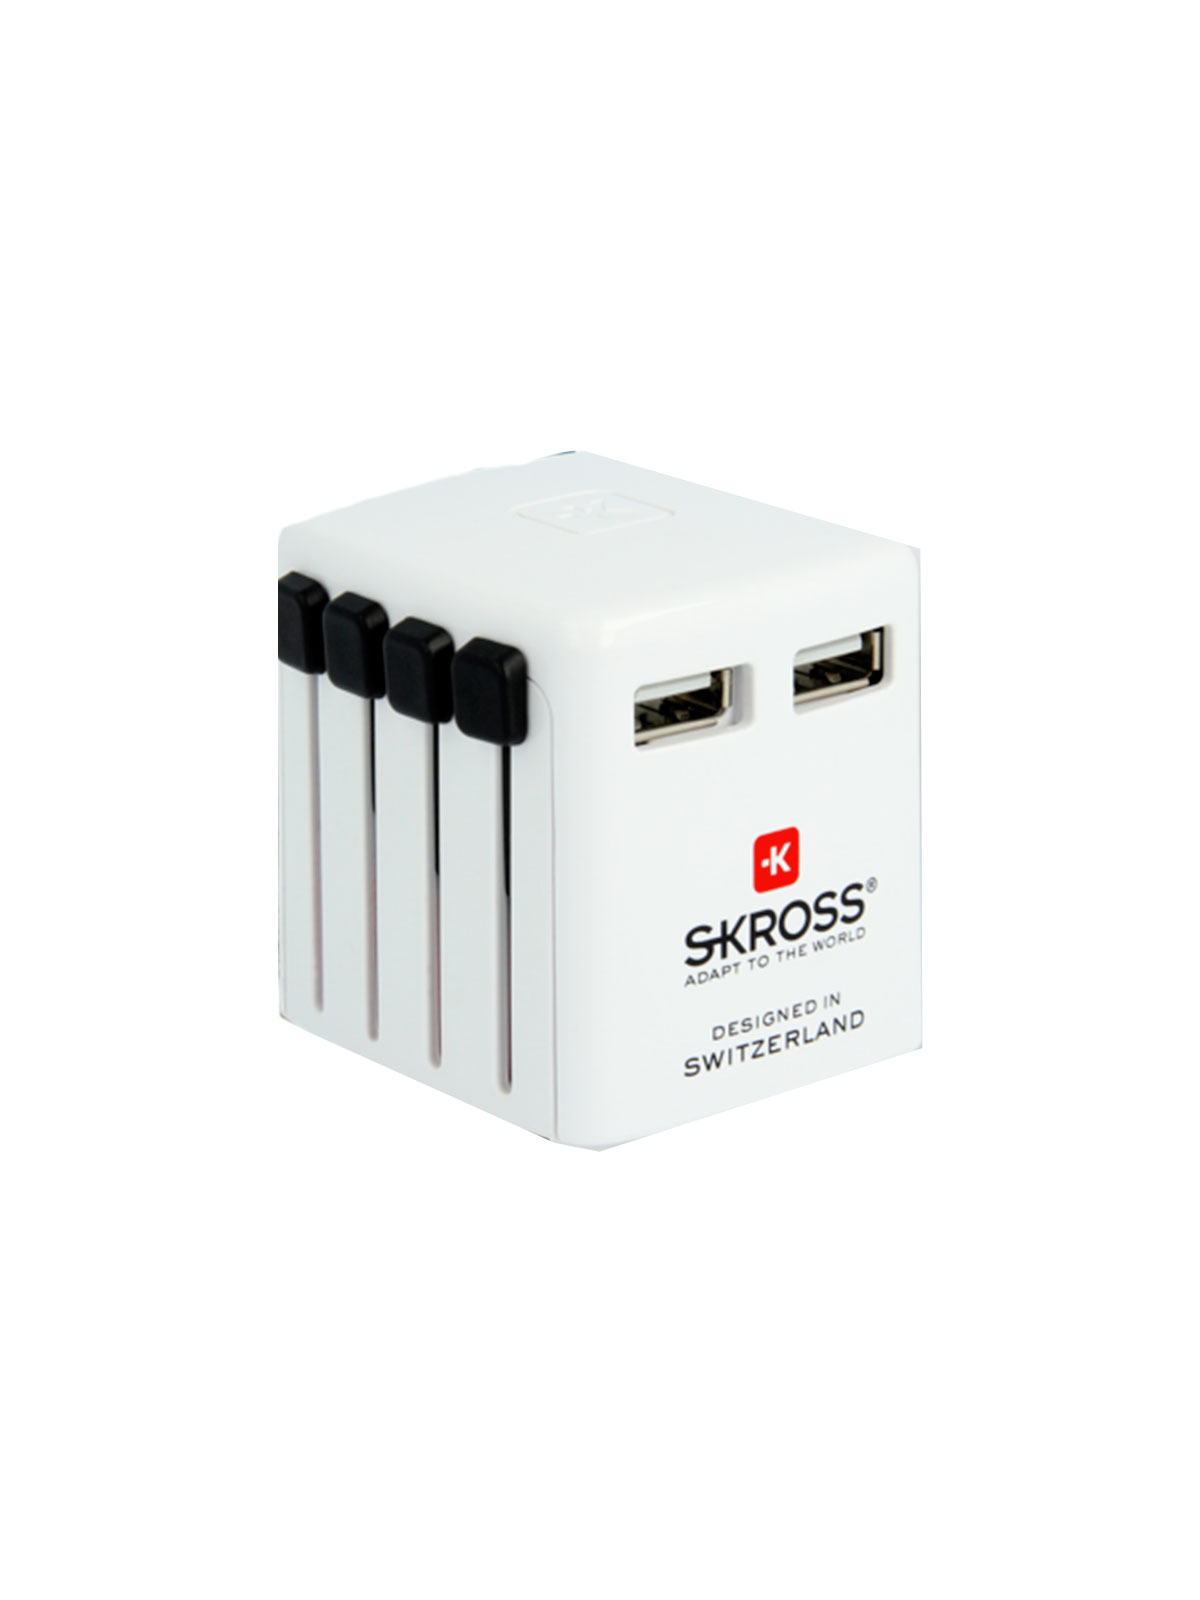 World 2 x USB Charger